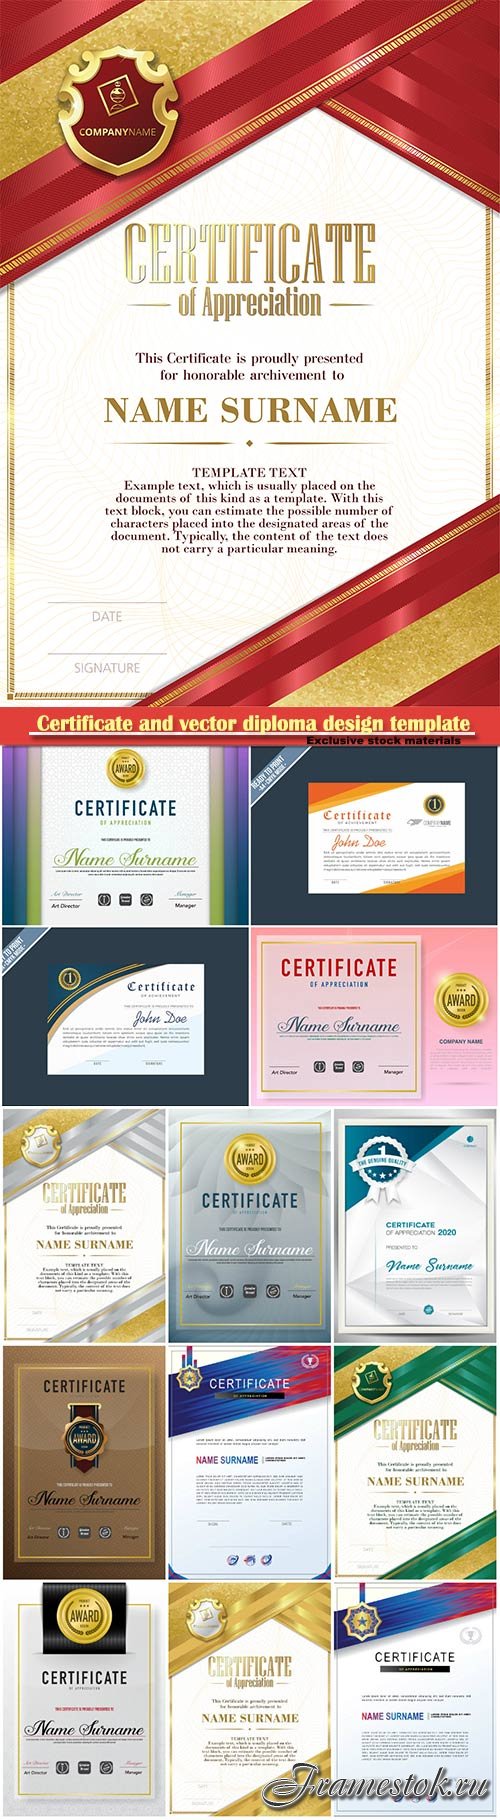 Certificate and vector diploma design template # 43